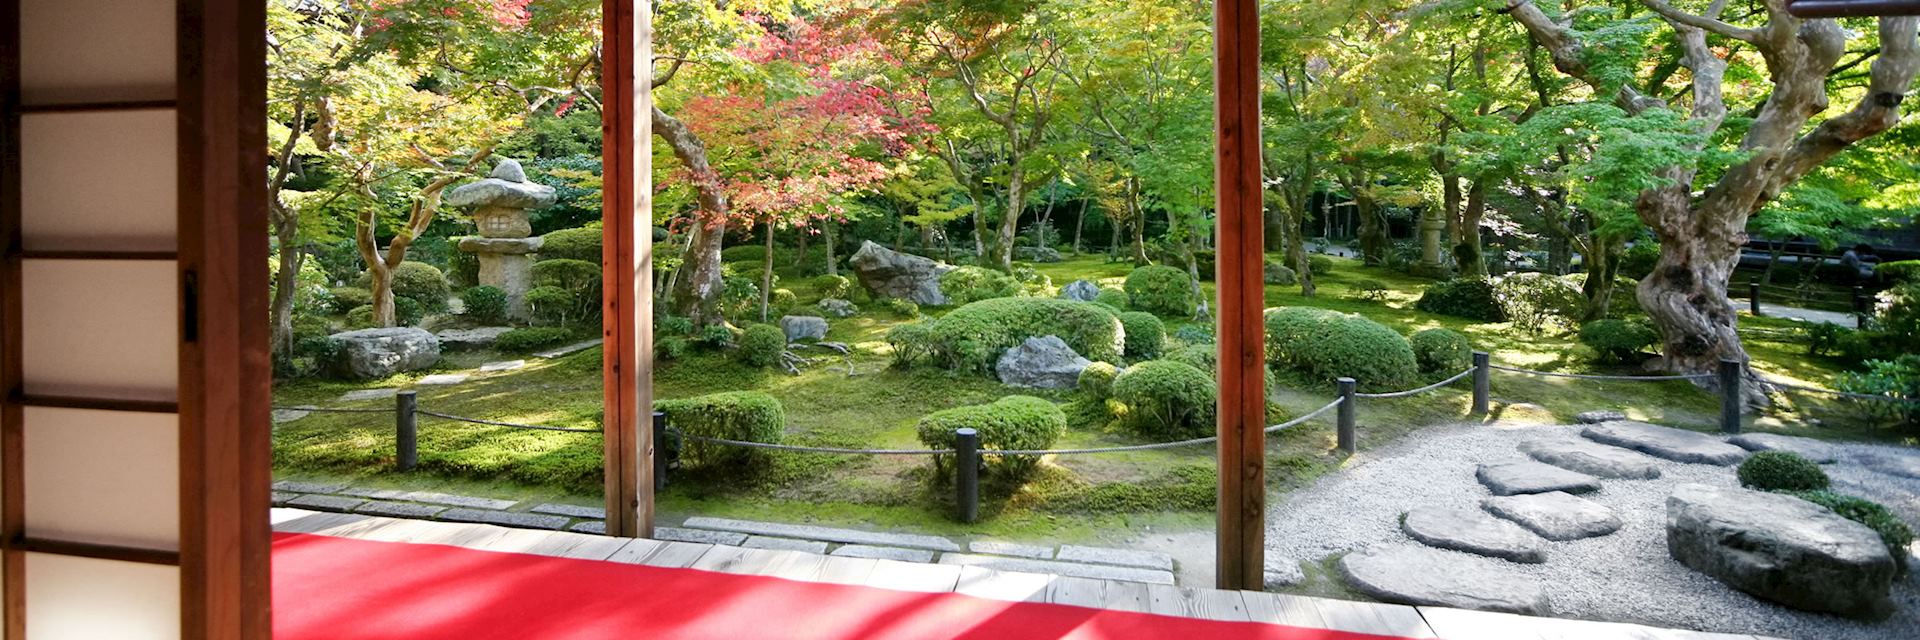 Gardens Of Japan Travel Guide Audley Travel